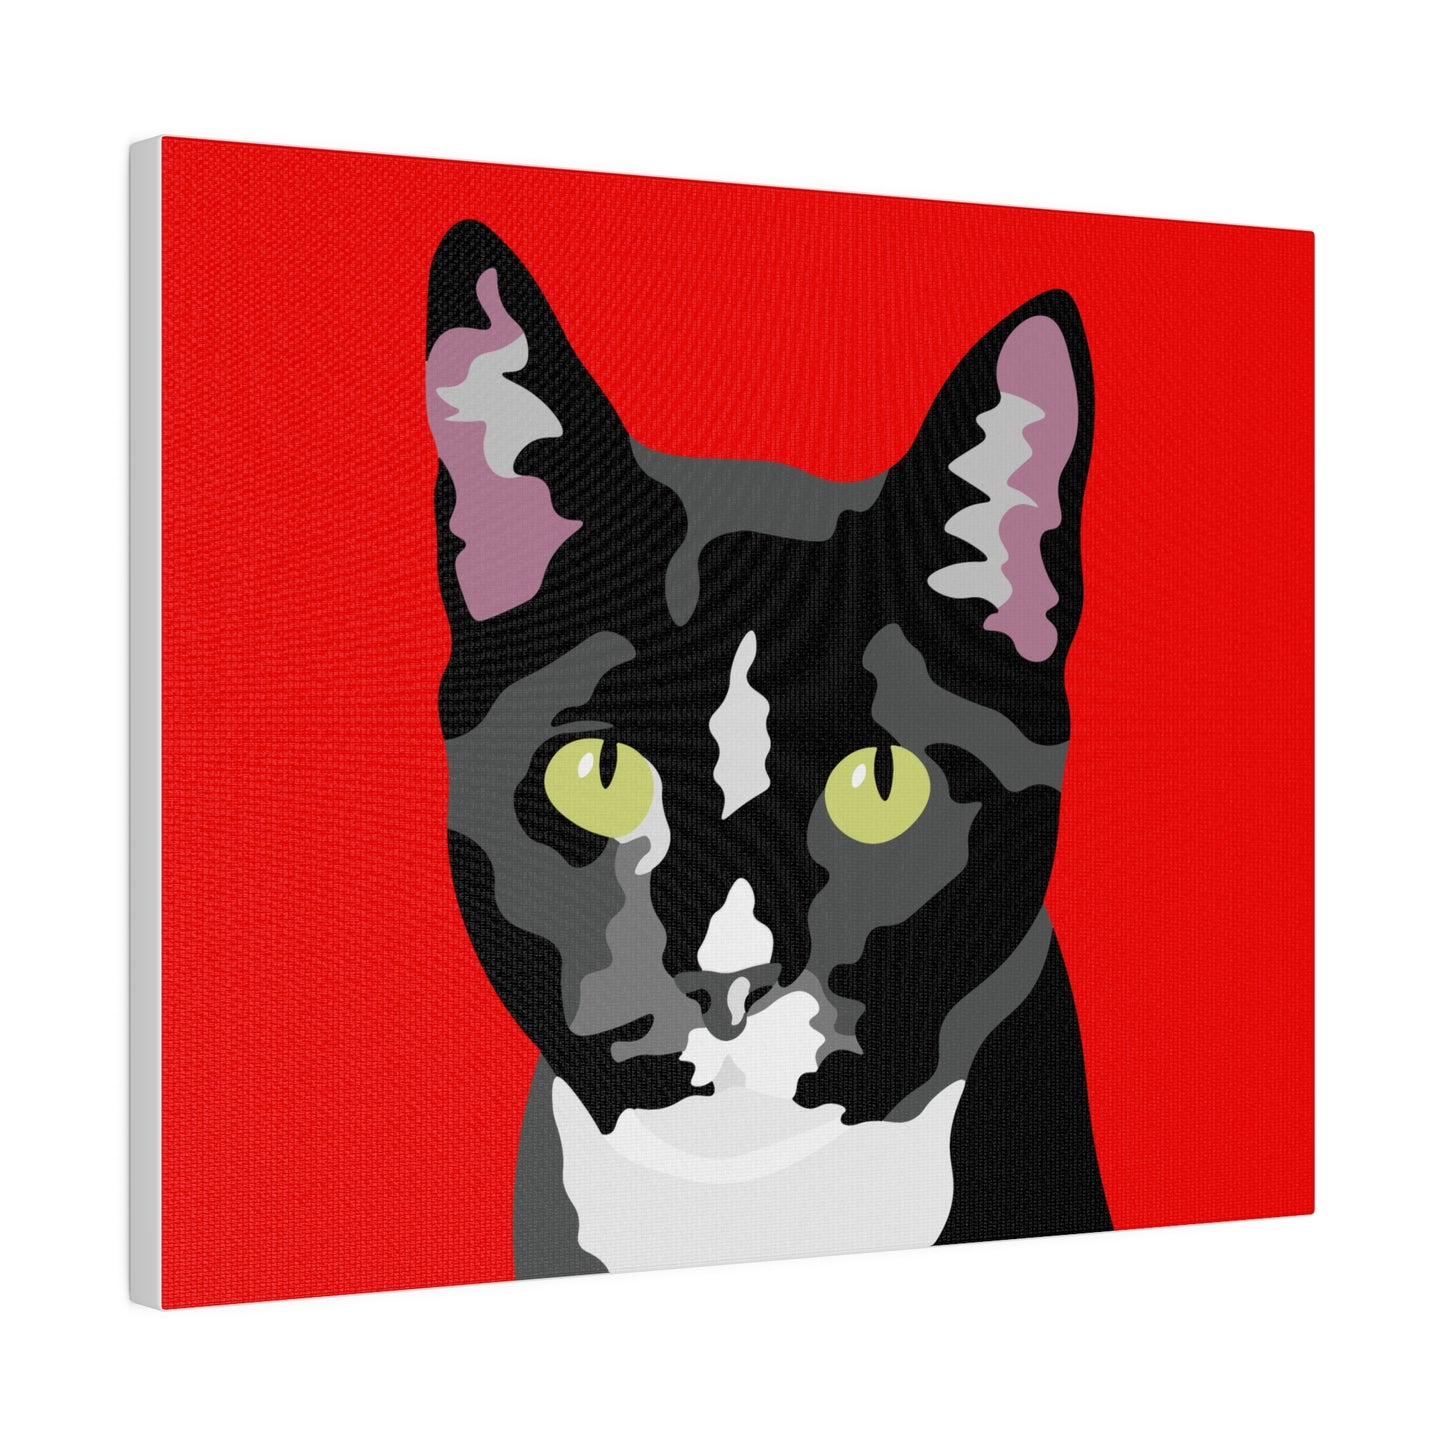 One Pet Portrait on Canvas | Red Background | Custom Hand-Drawn Pet Portrait in Cartoon-Realism Style